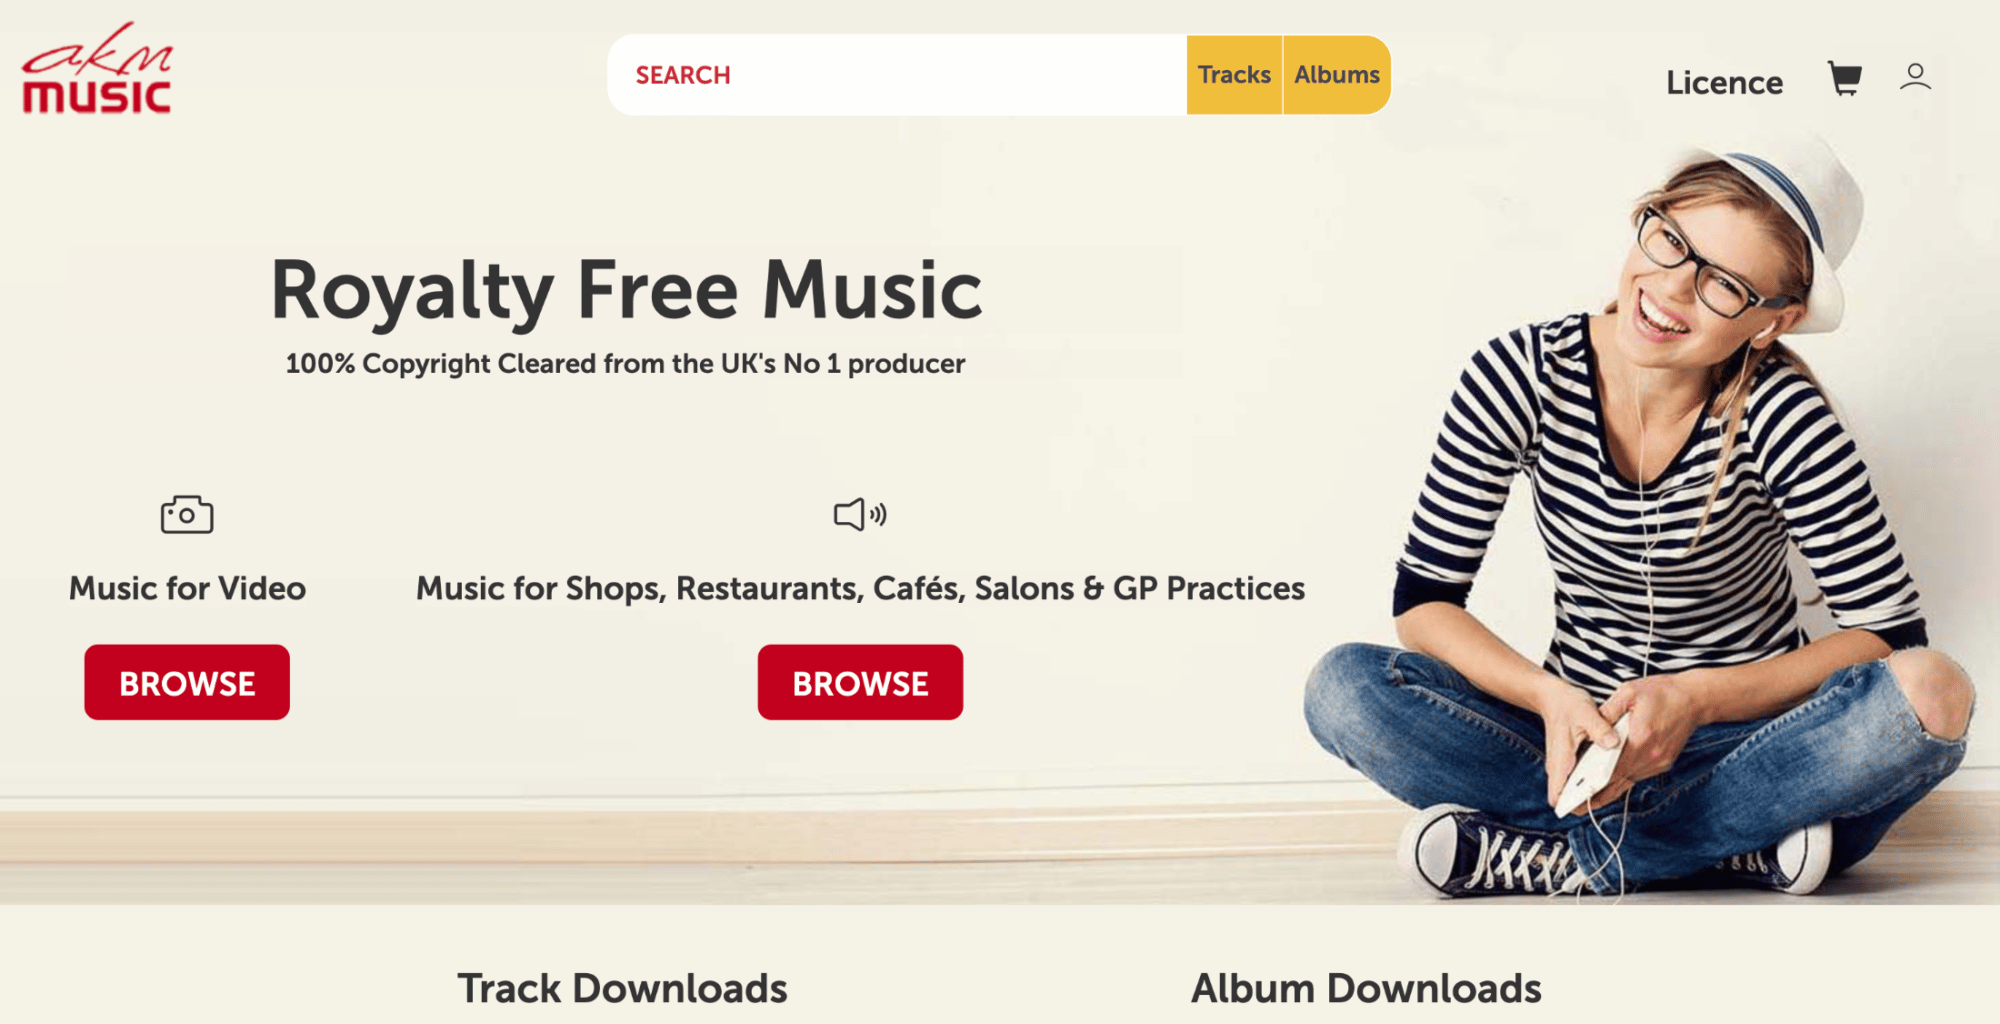 19 Best Websites to Download Royalty-Free Music For Games